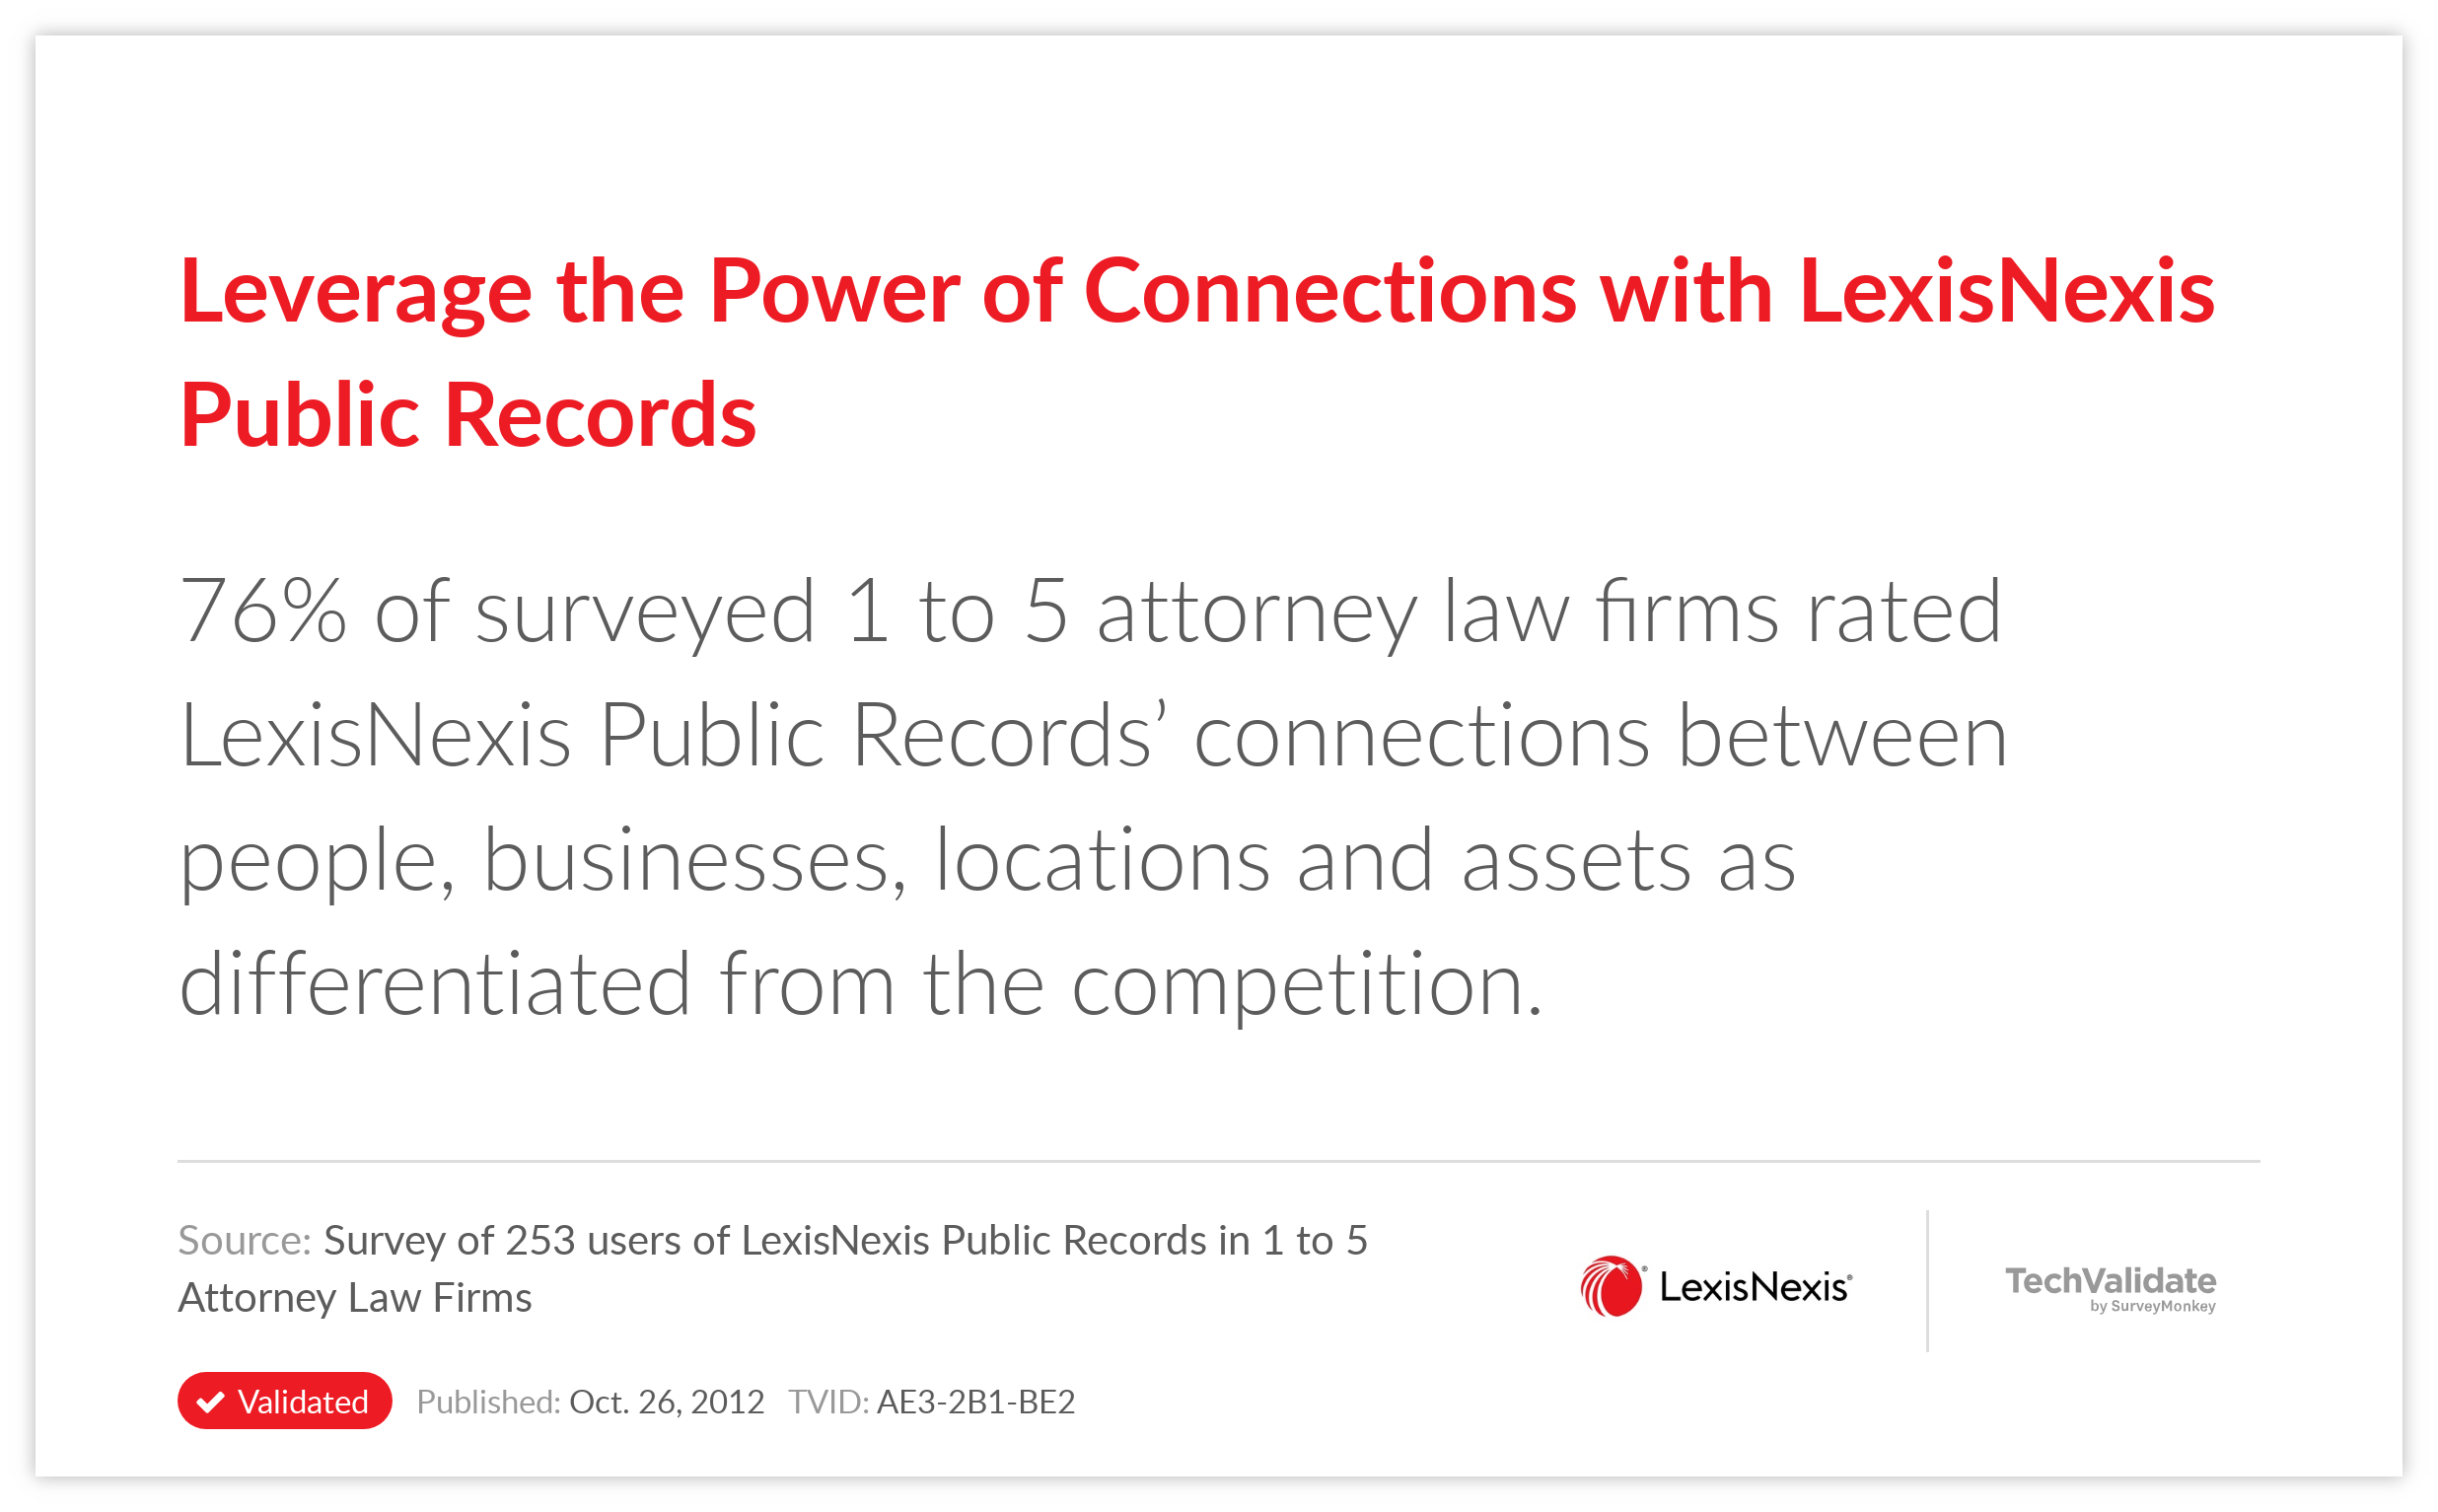 Leverage the Power of Connections with LexisNexis Public Records